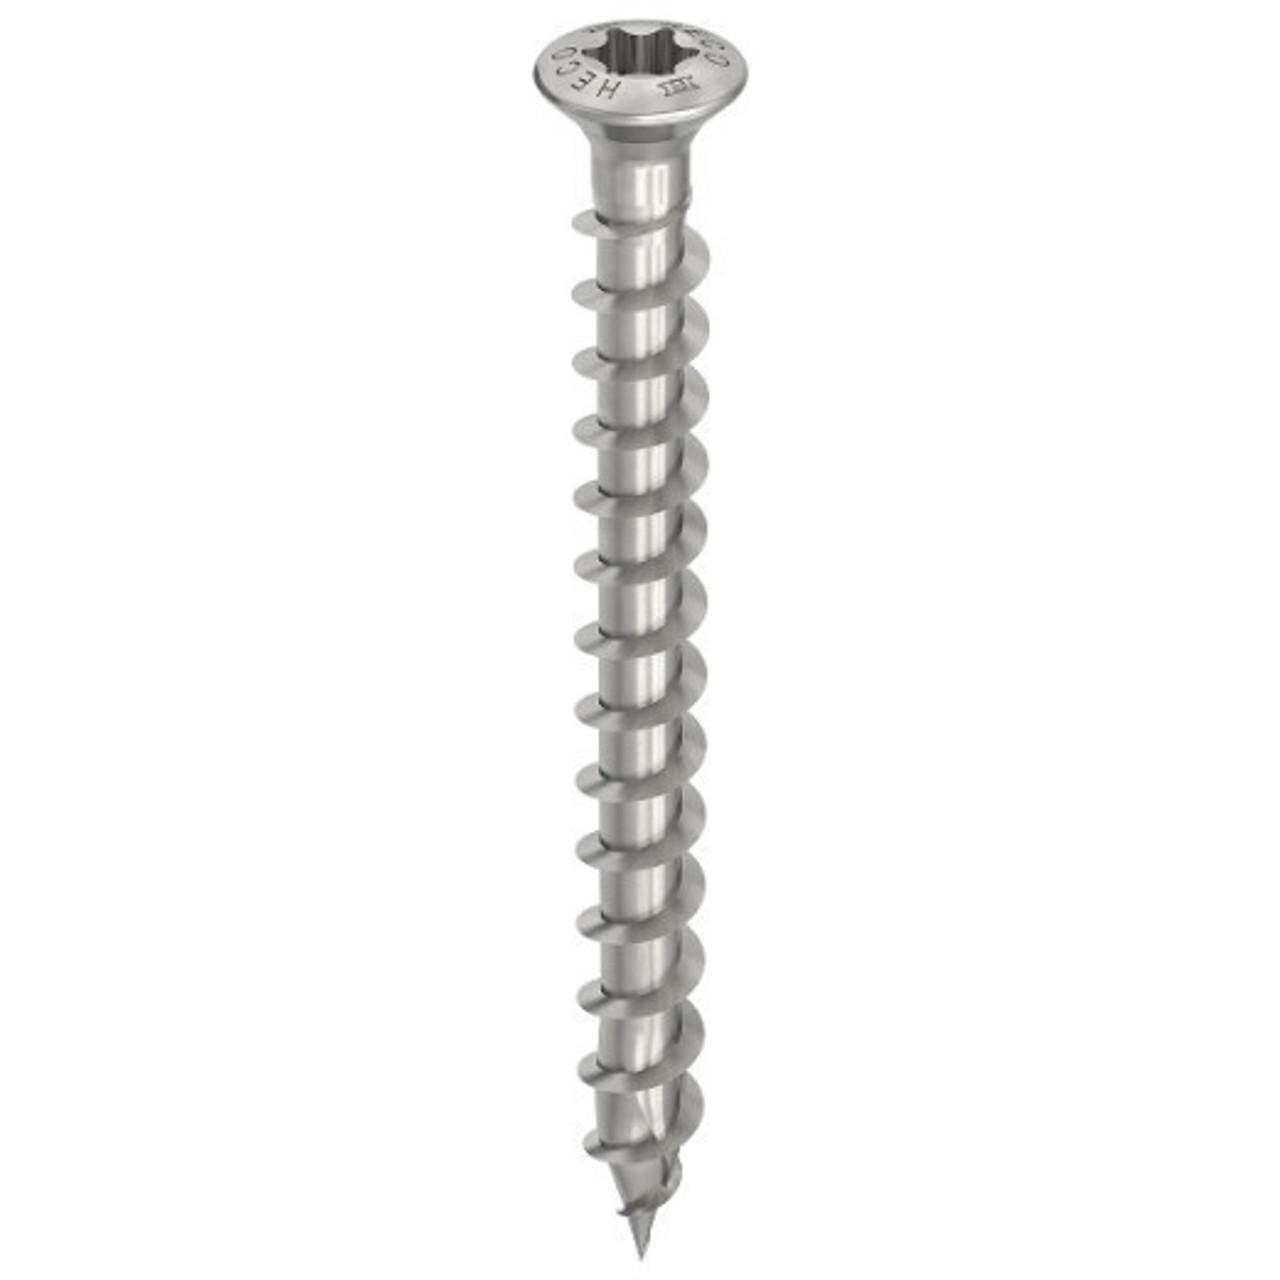 HECO Raised Countersunk Head Screws | 4.5mm A2 304 Stainless Steel Raised Countersunk Head Screws with HD20 Drive for Carpentry Screws, Timber Cladding Screws and Fasteners